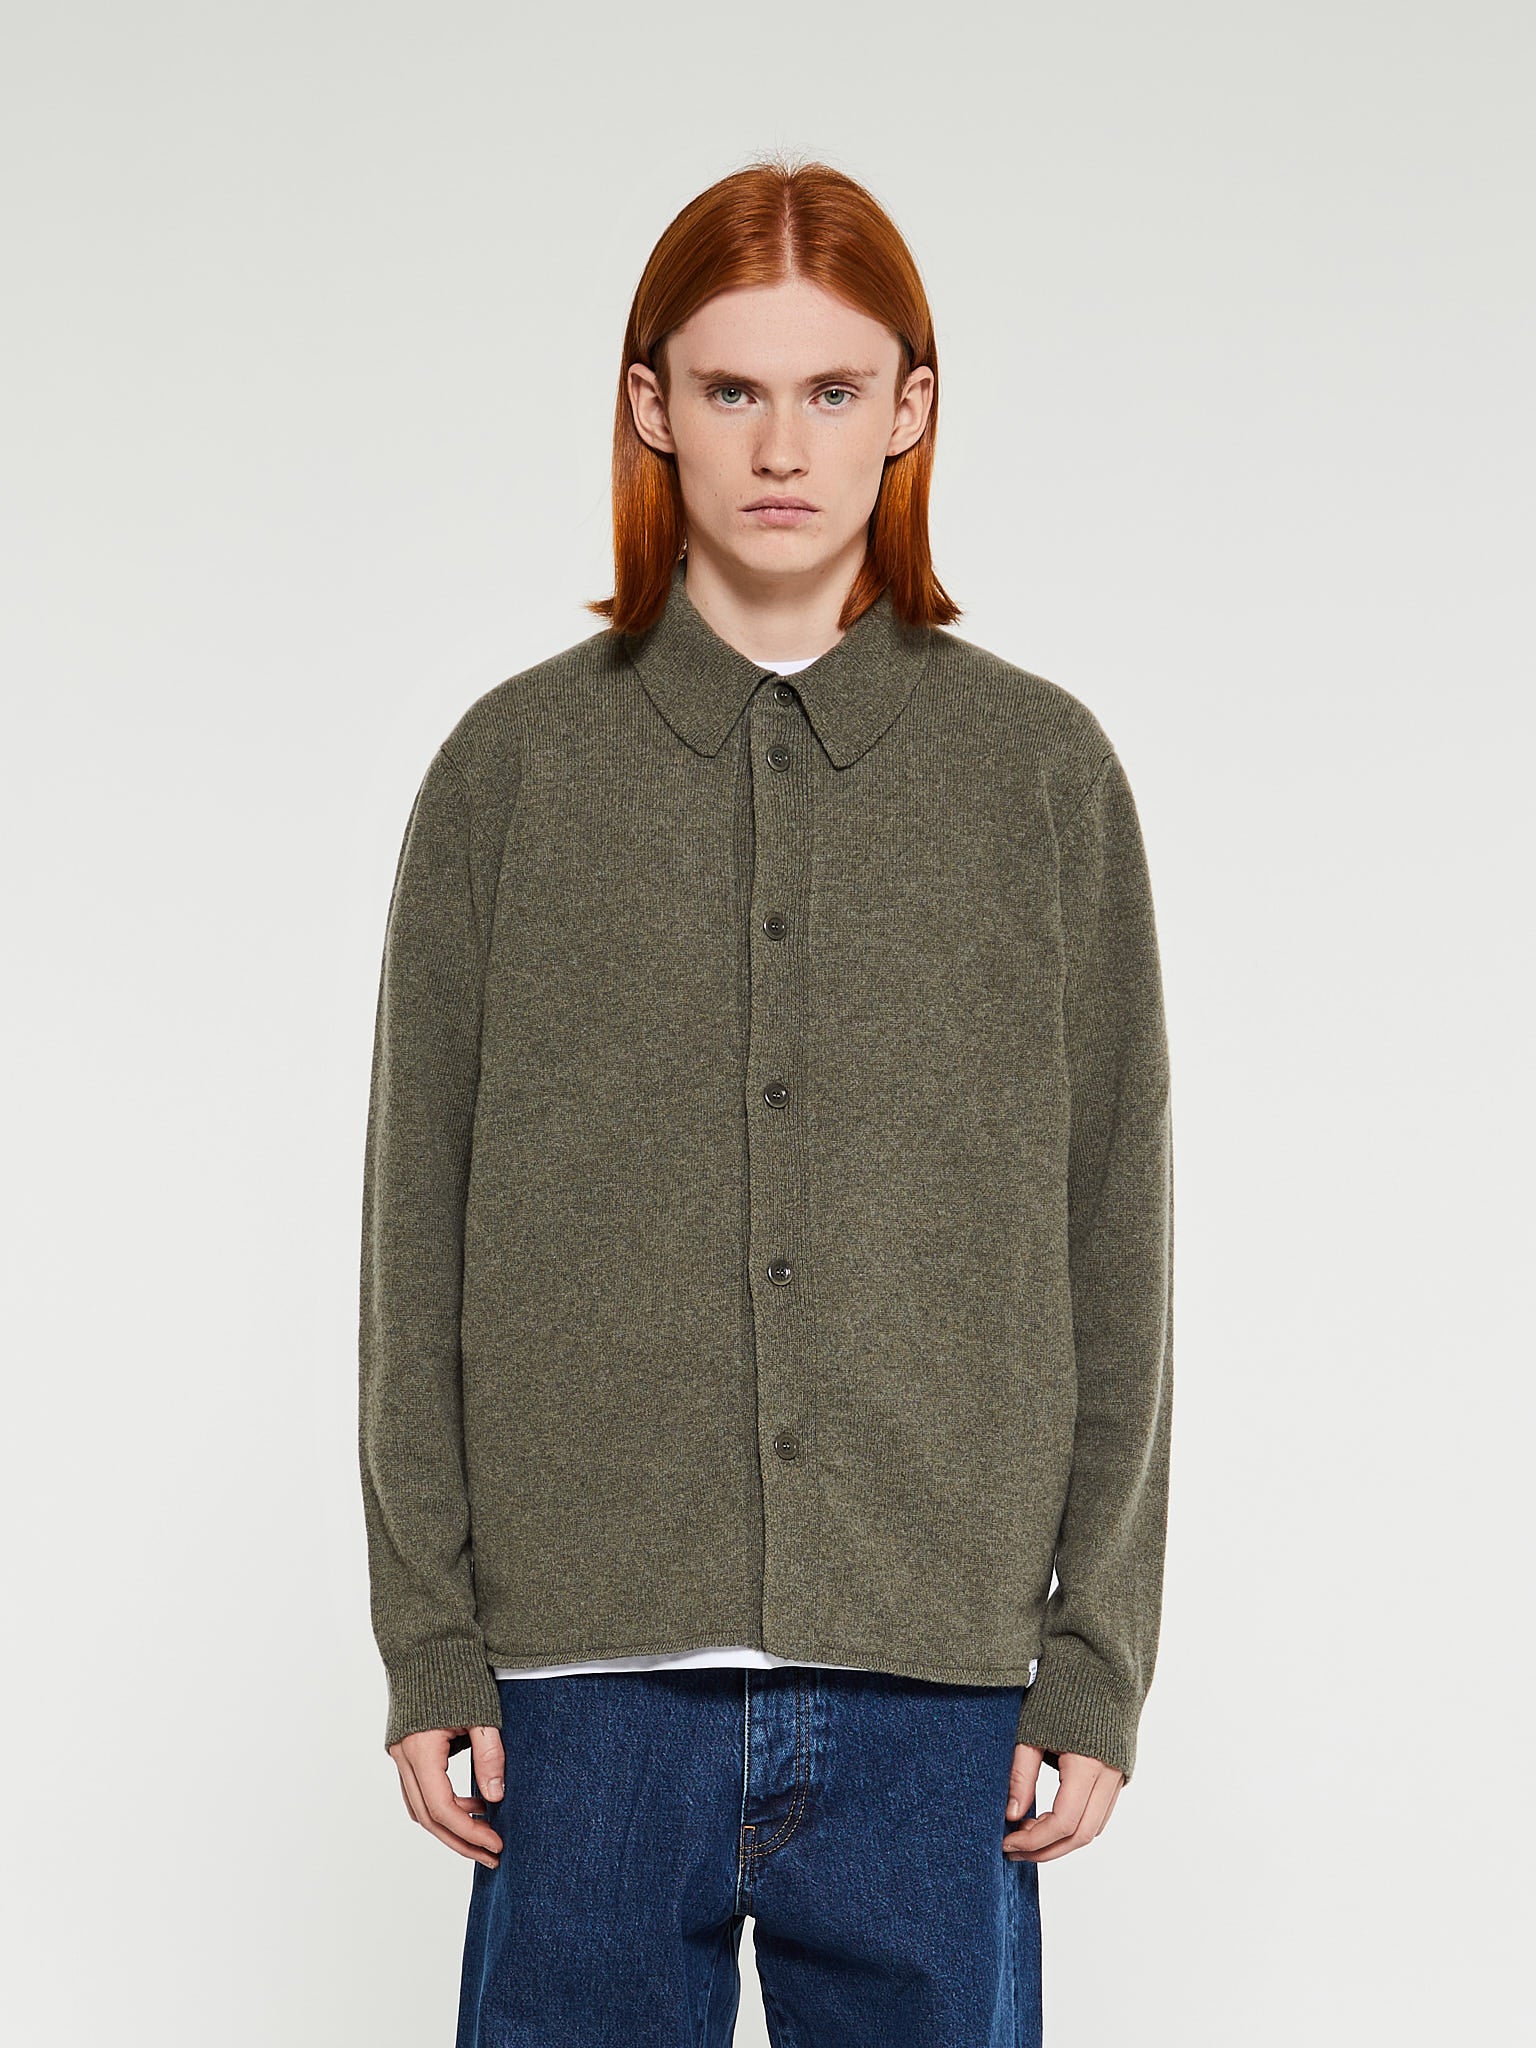 Norse Projects - Martin Merino Lambswool Shirt in Ivy Green